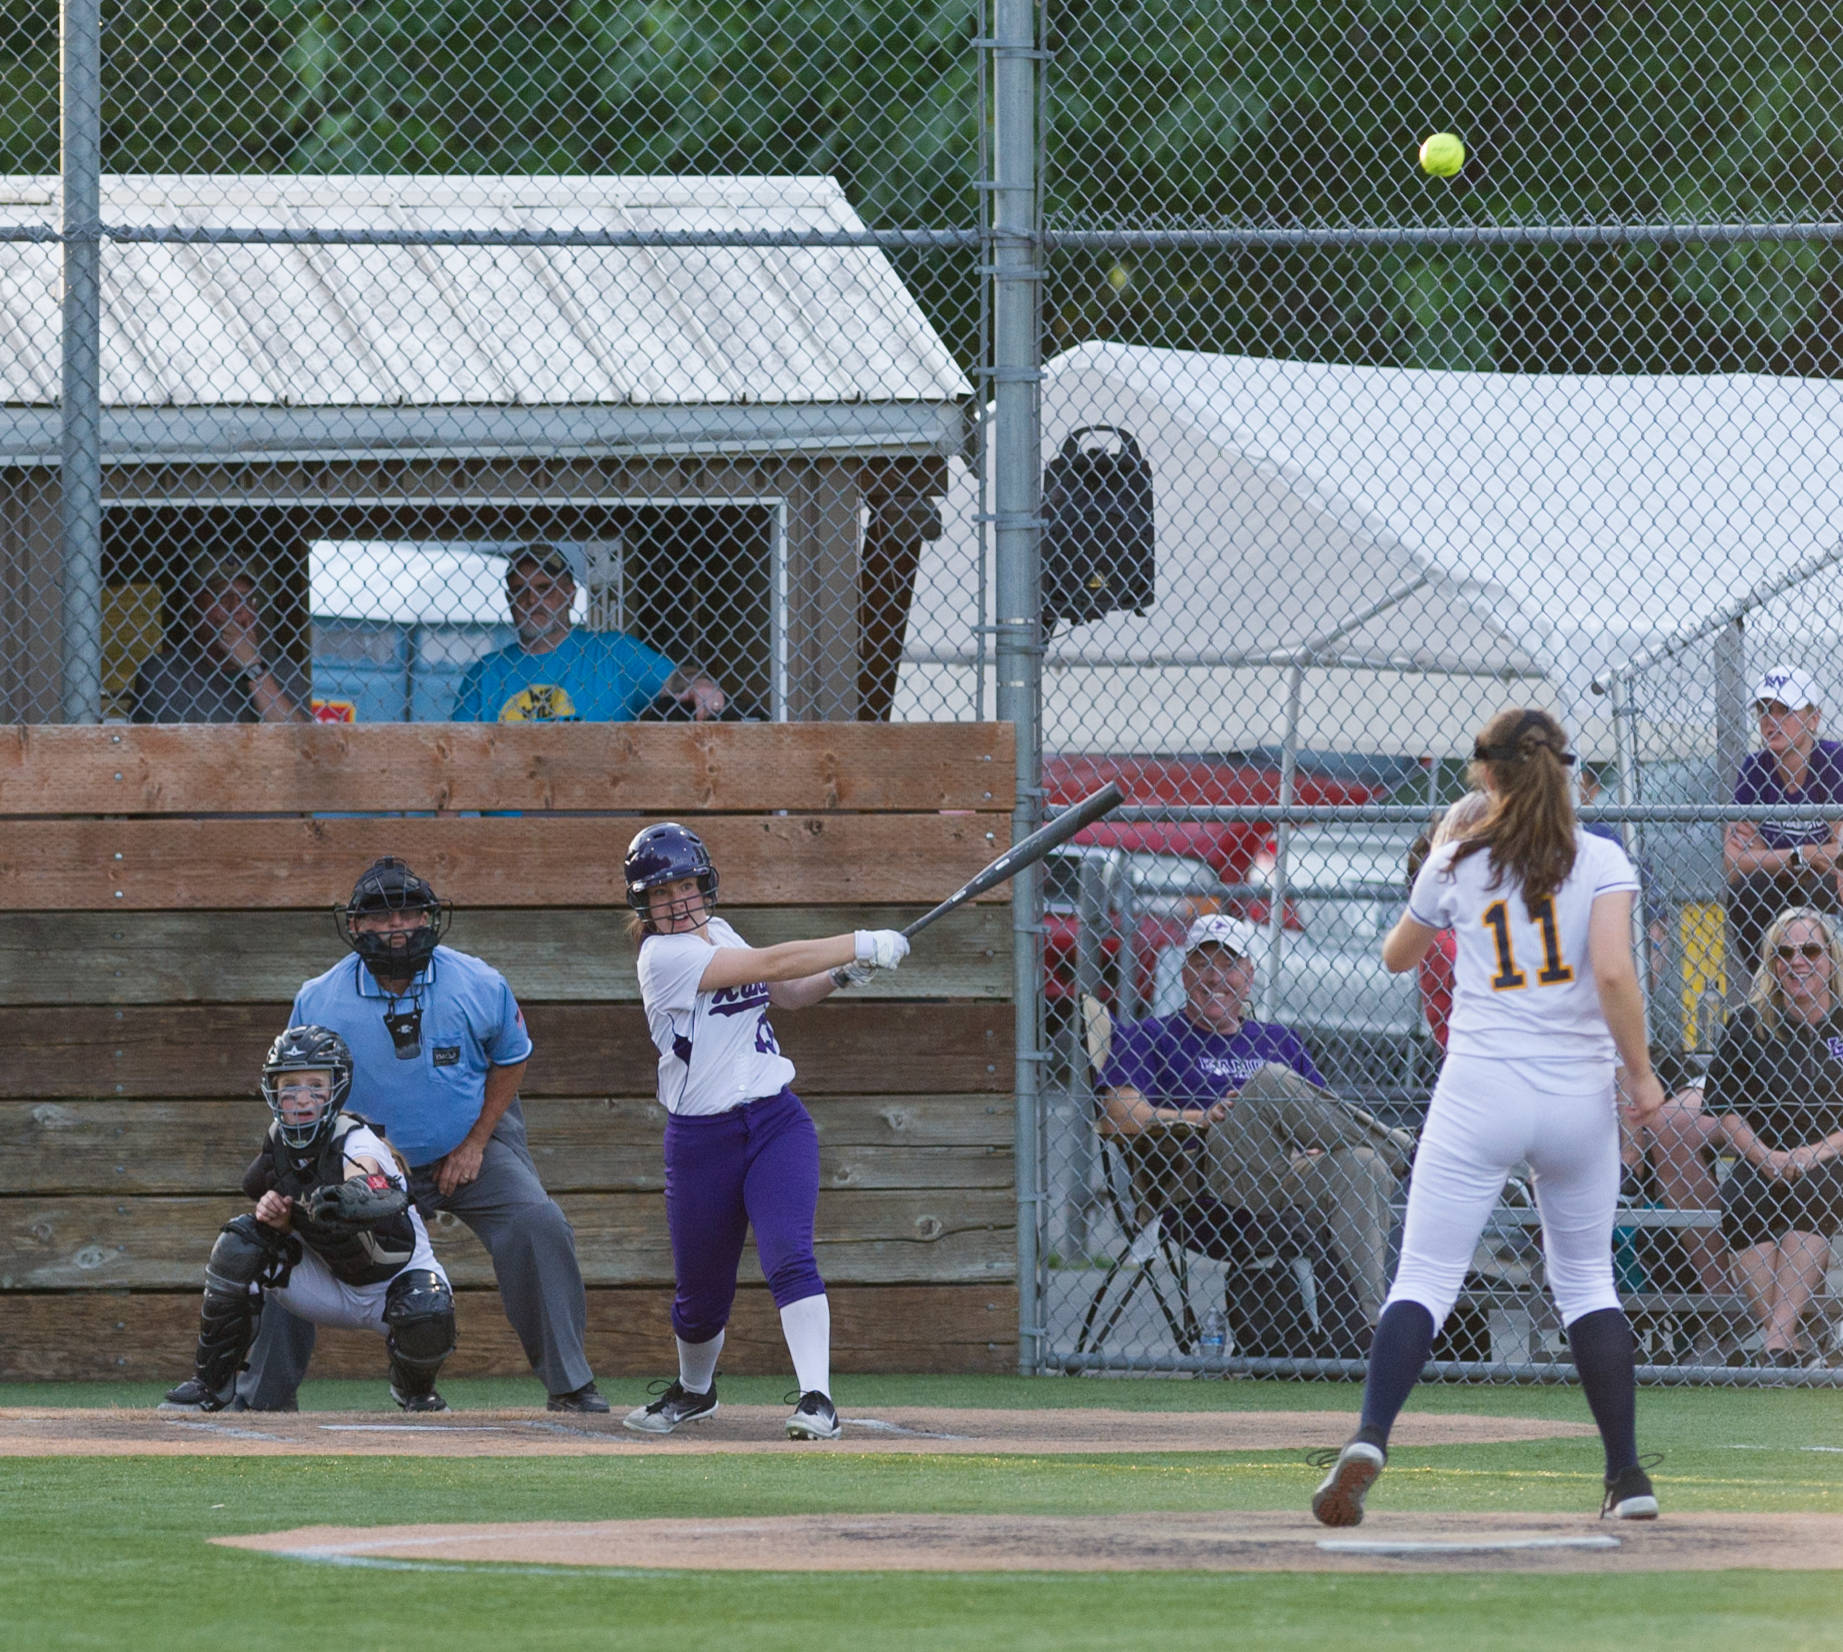 Maddie Miller smacks a two-run homer in the sixth inning to put the Kangs ahead, 6-5. Courtesy of Eric Chen